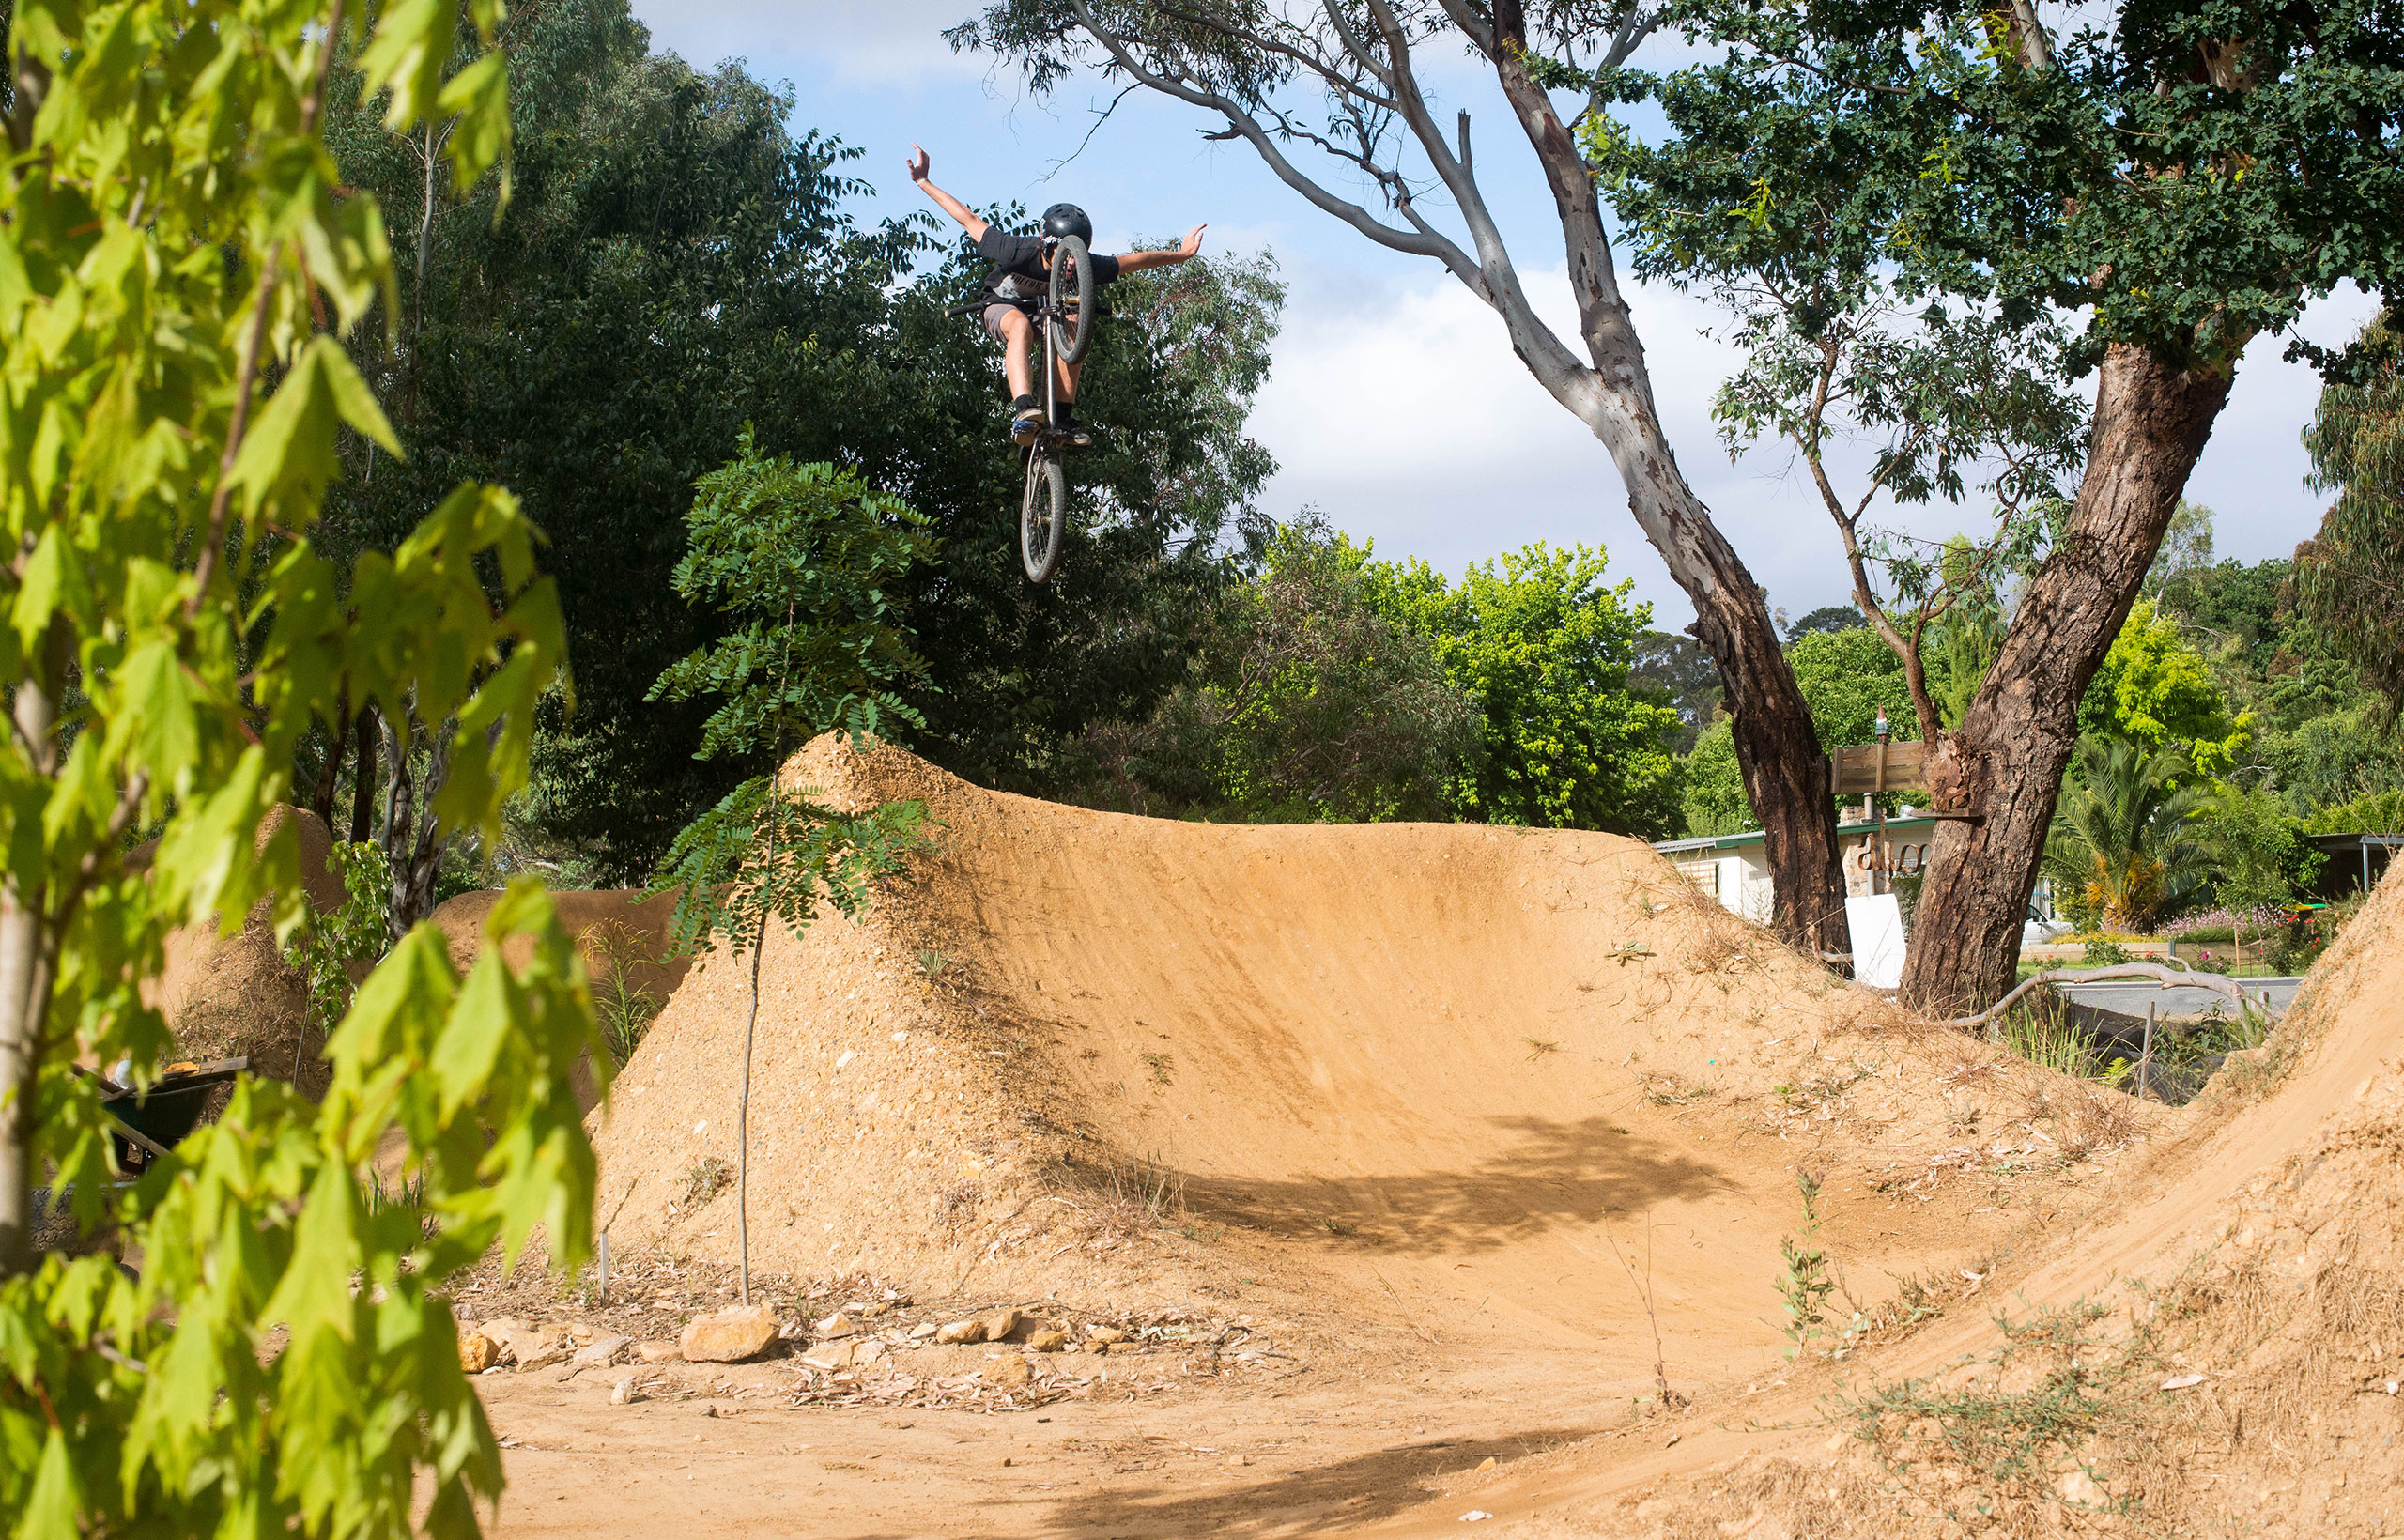 Brayden McPharlin is younger than most and rides bigger trails than most.